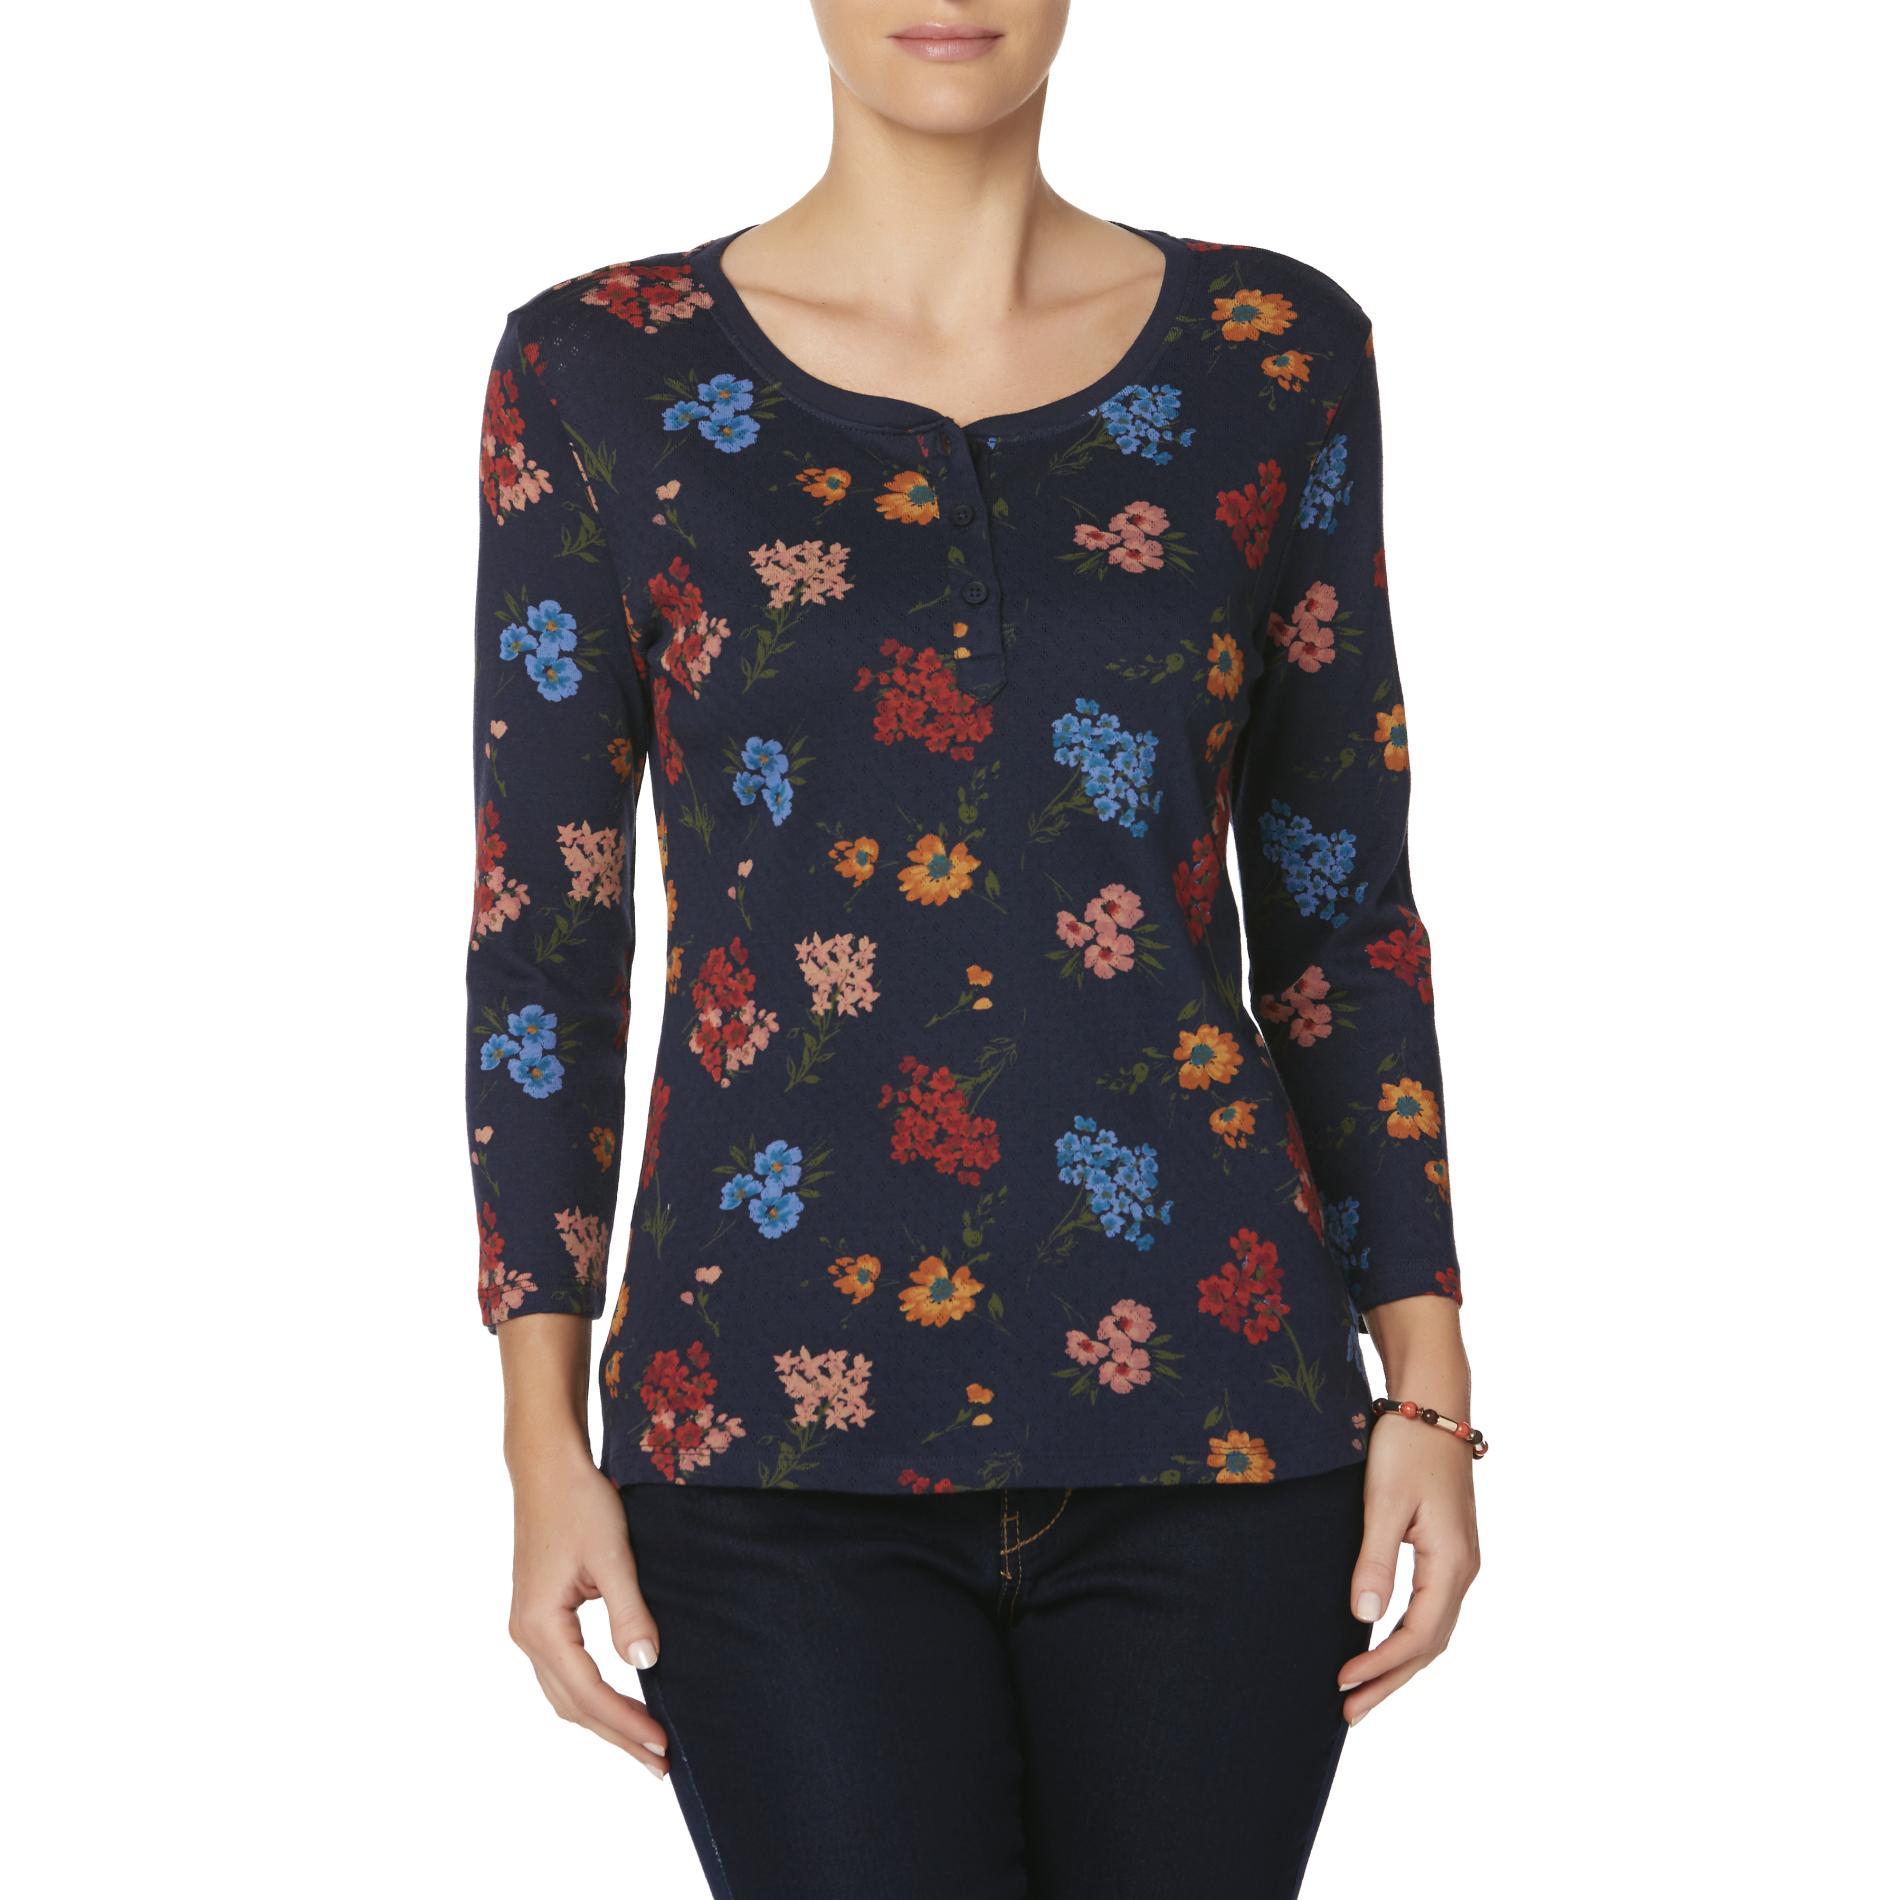 Basic Editions Women's Henley Top - Floral